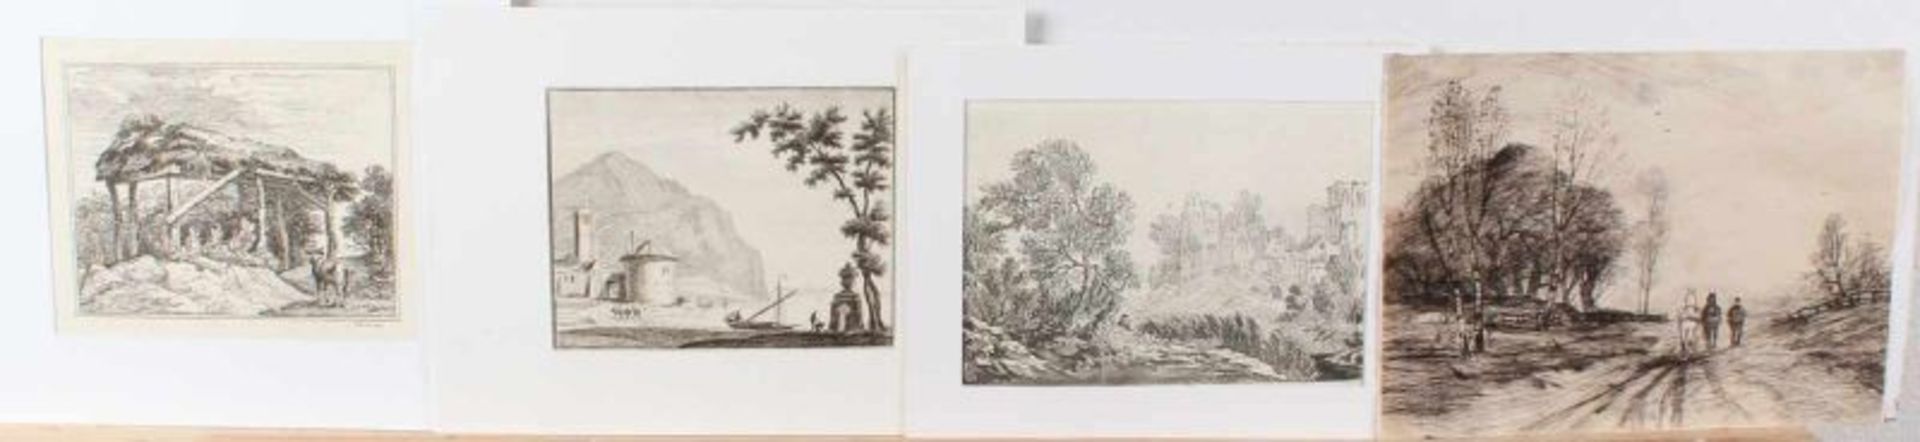 Four works on paper 18th-19th century. A single engraving with horses, The Hague school. A meal of